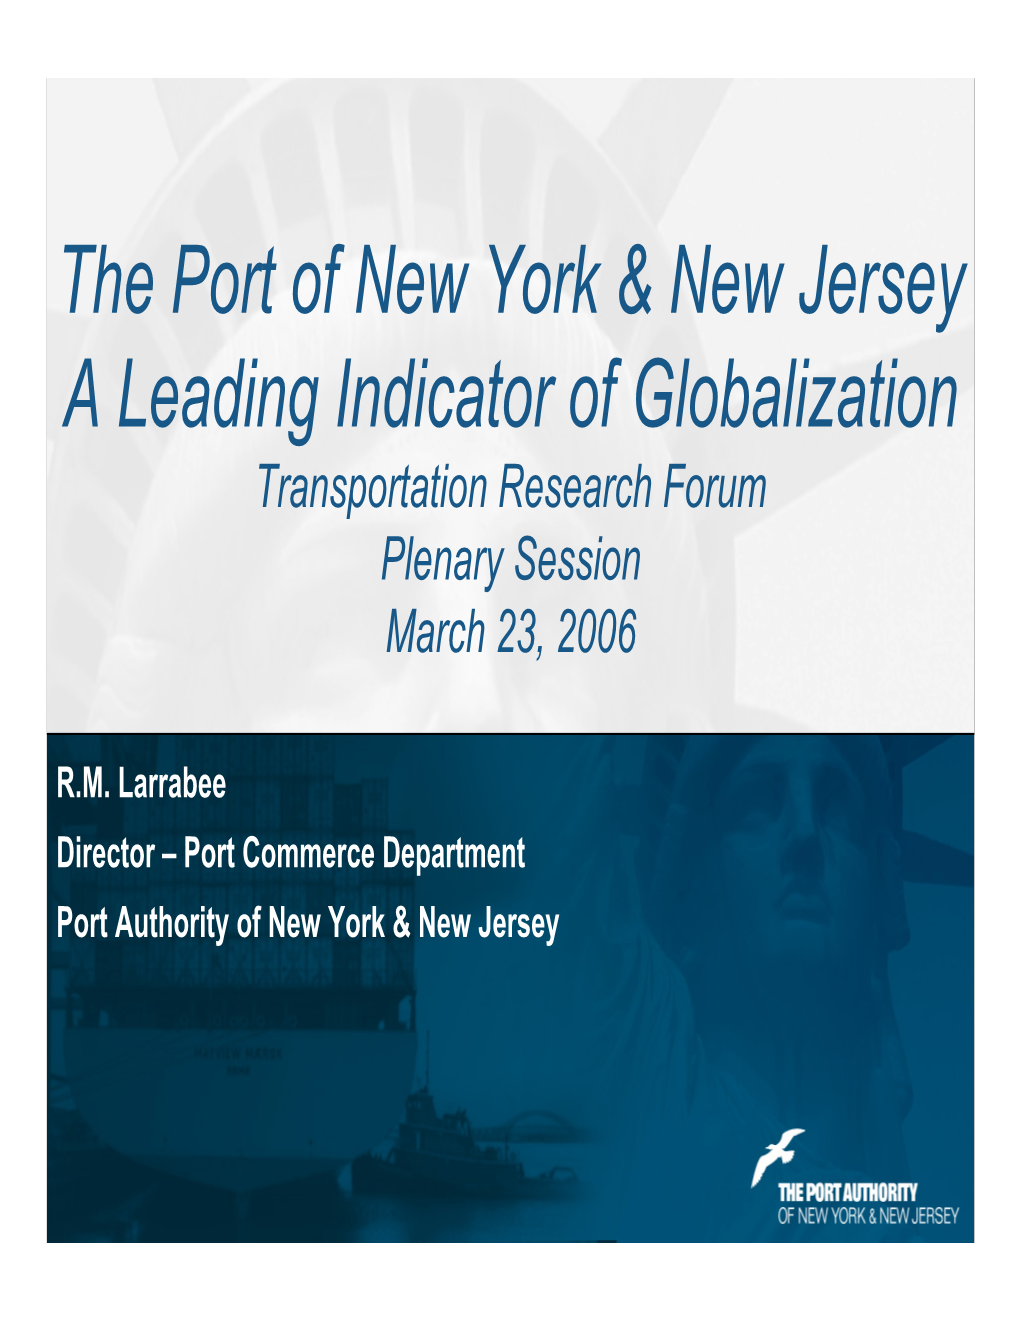 The Port of New York & New Jersey a Leading Indicator of Globalization